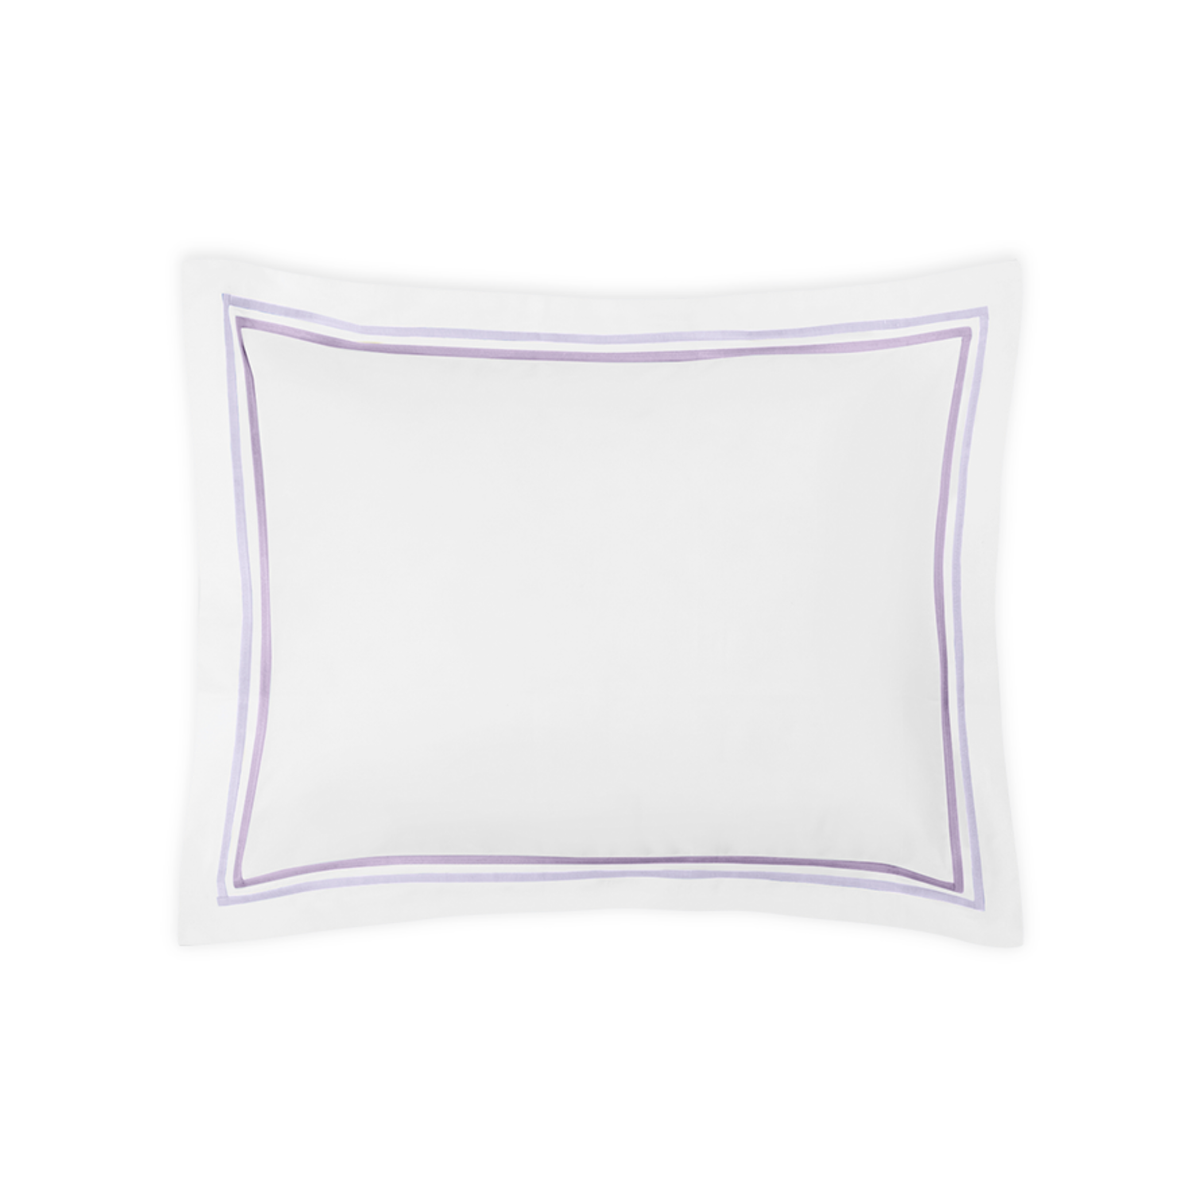 Boudoir Sham of Matouk Essex Bedding Collection in Lilac Color